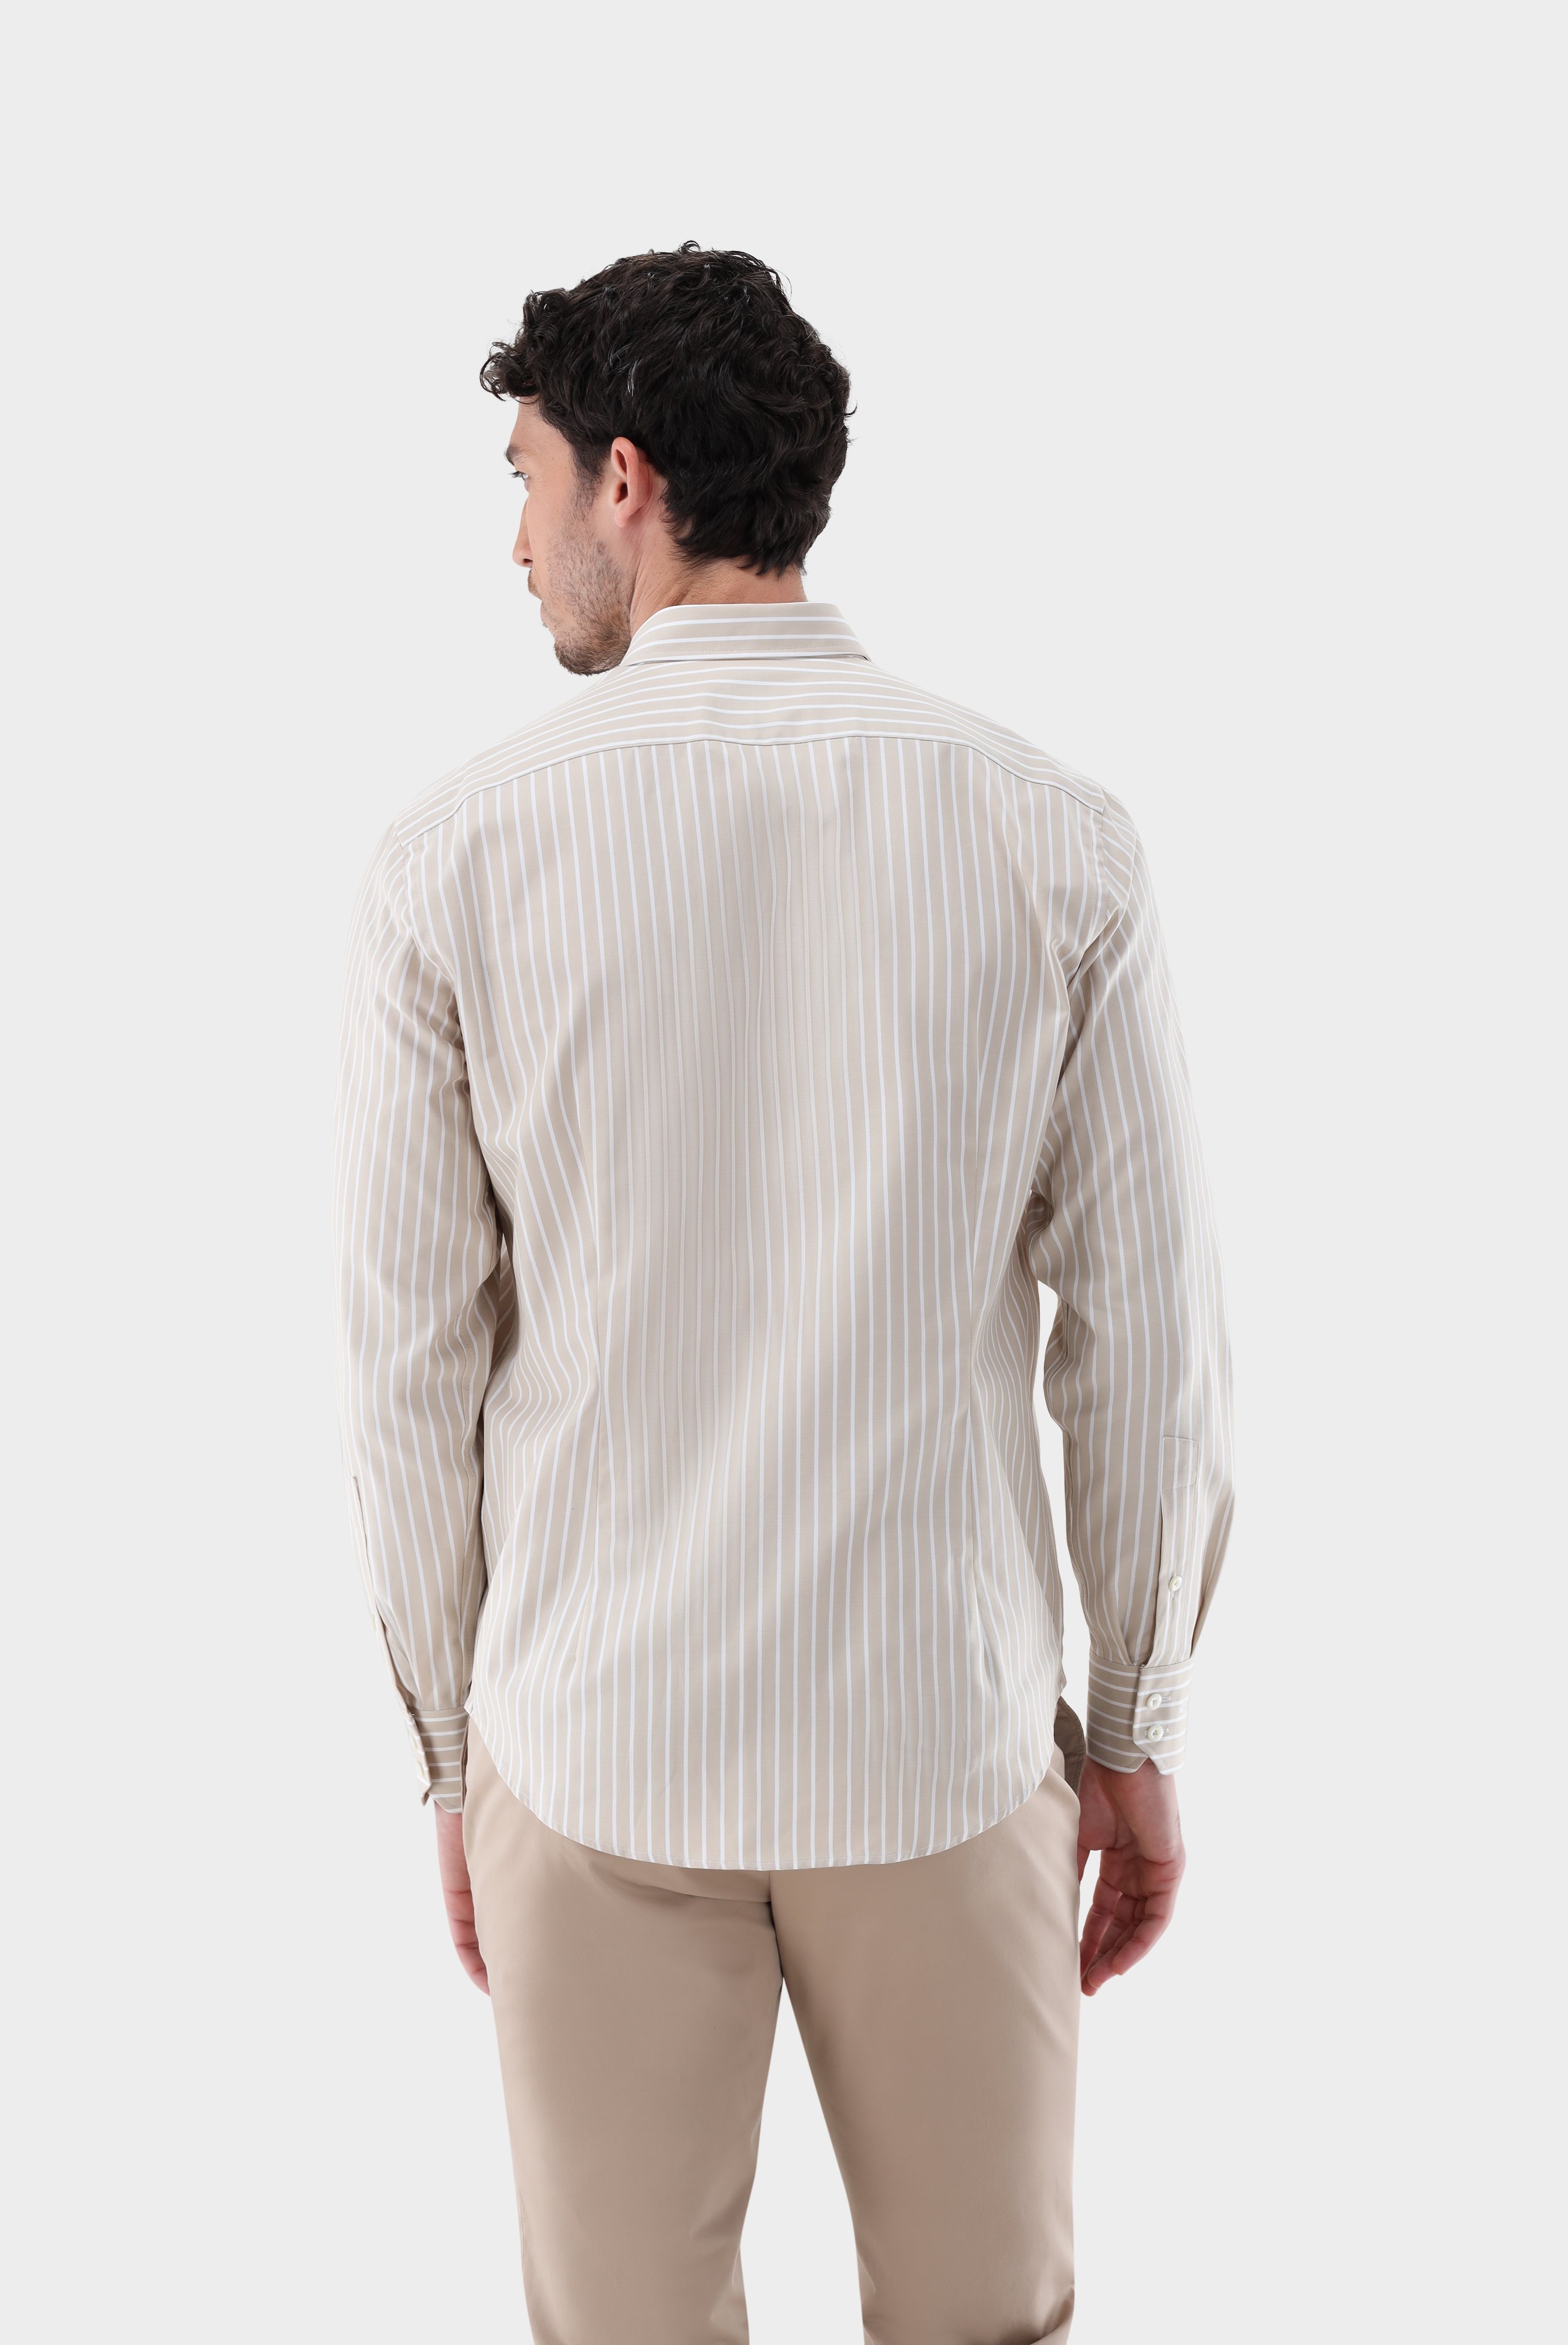 Casual Shirts+Striped Oxford Shirt Tailor Fit+20.2013.AV.151956.120.38